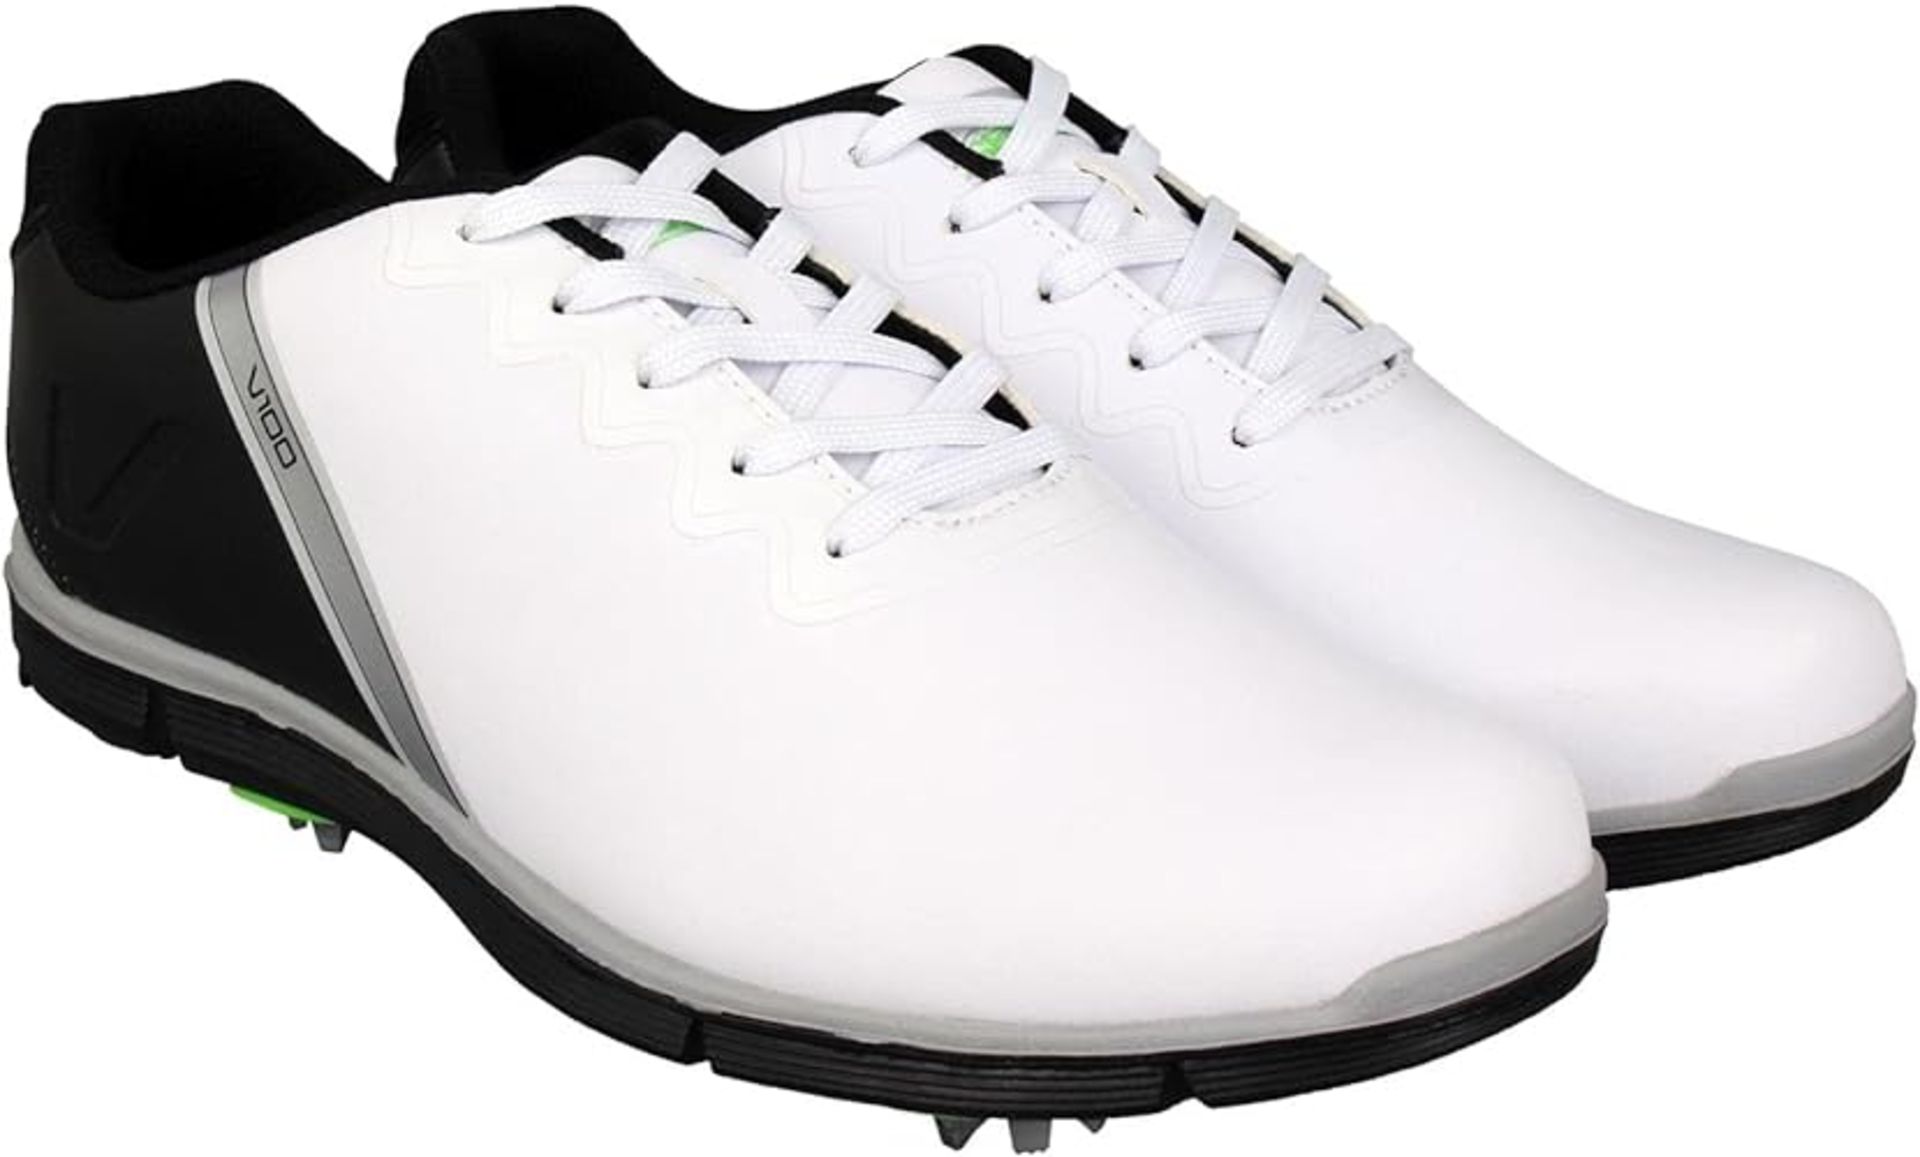 2 X BRAND NEW PAIRS OF SLAZENGER V100 PROFESSIONAL GOLF SHOES SIZE 7 RRP £89 EACH S1RA - Image 3 of 3